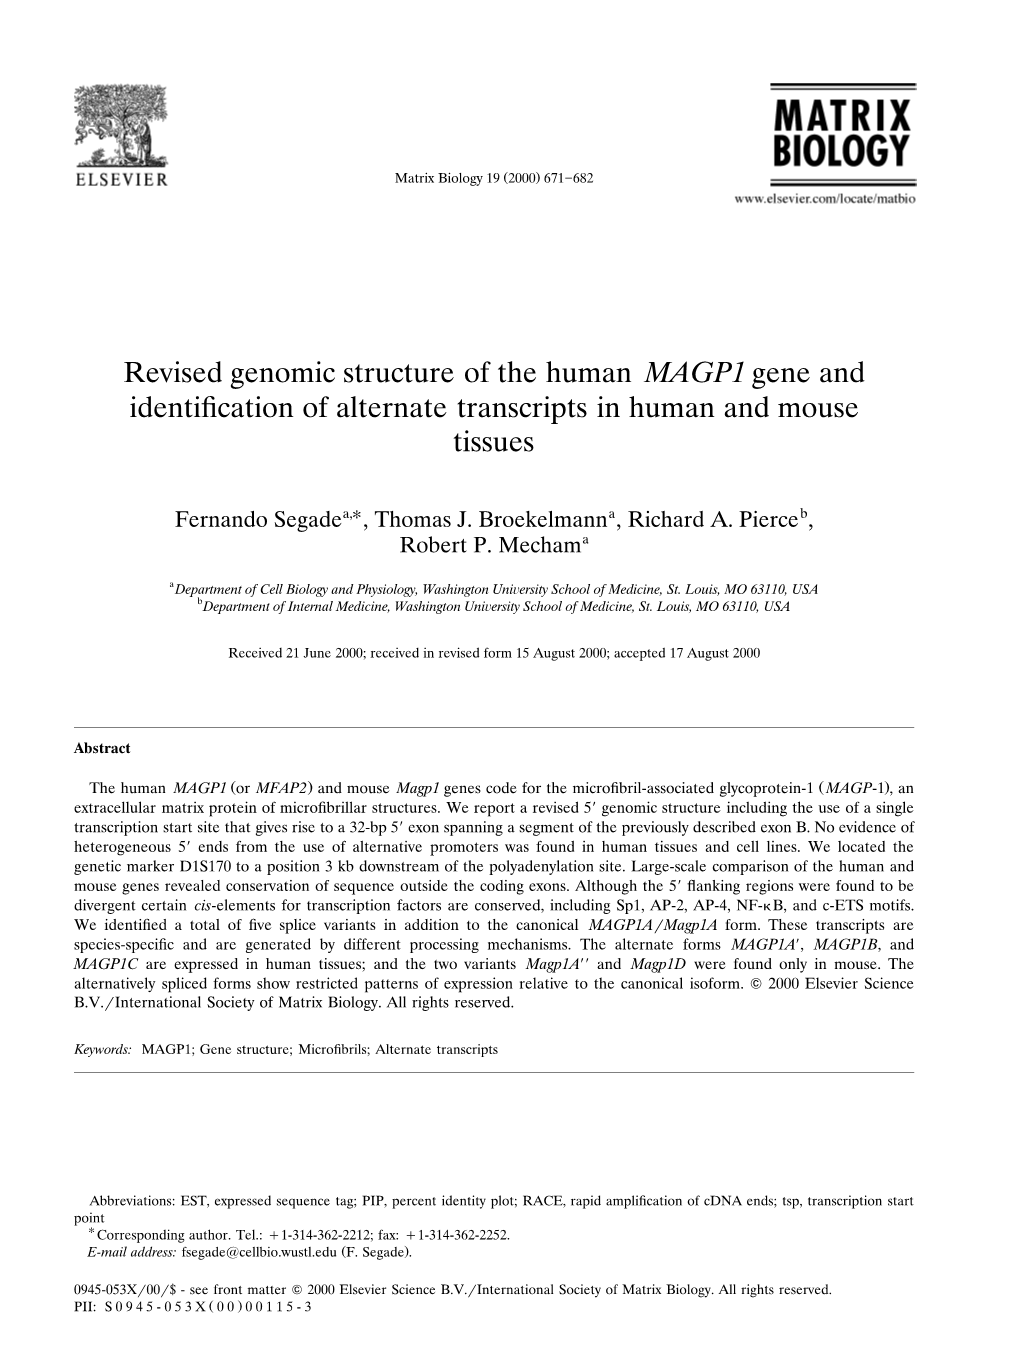 Revised Genomic Structure of the Human Magp1gene And